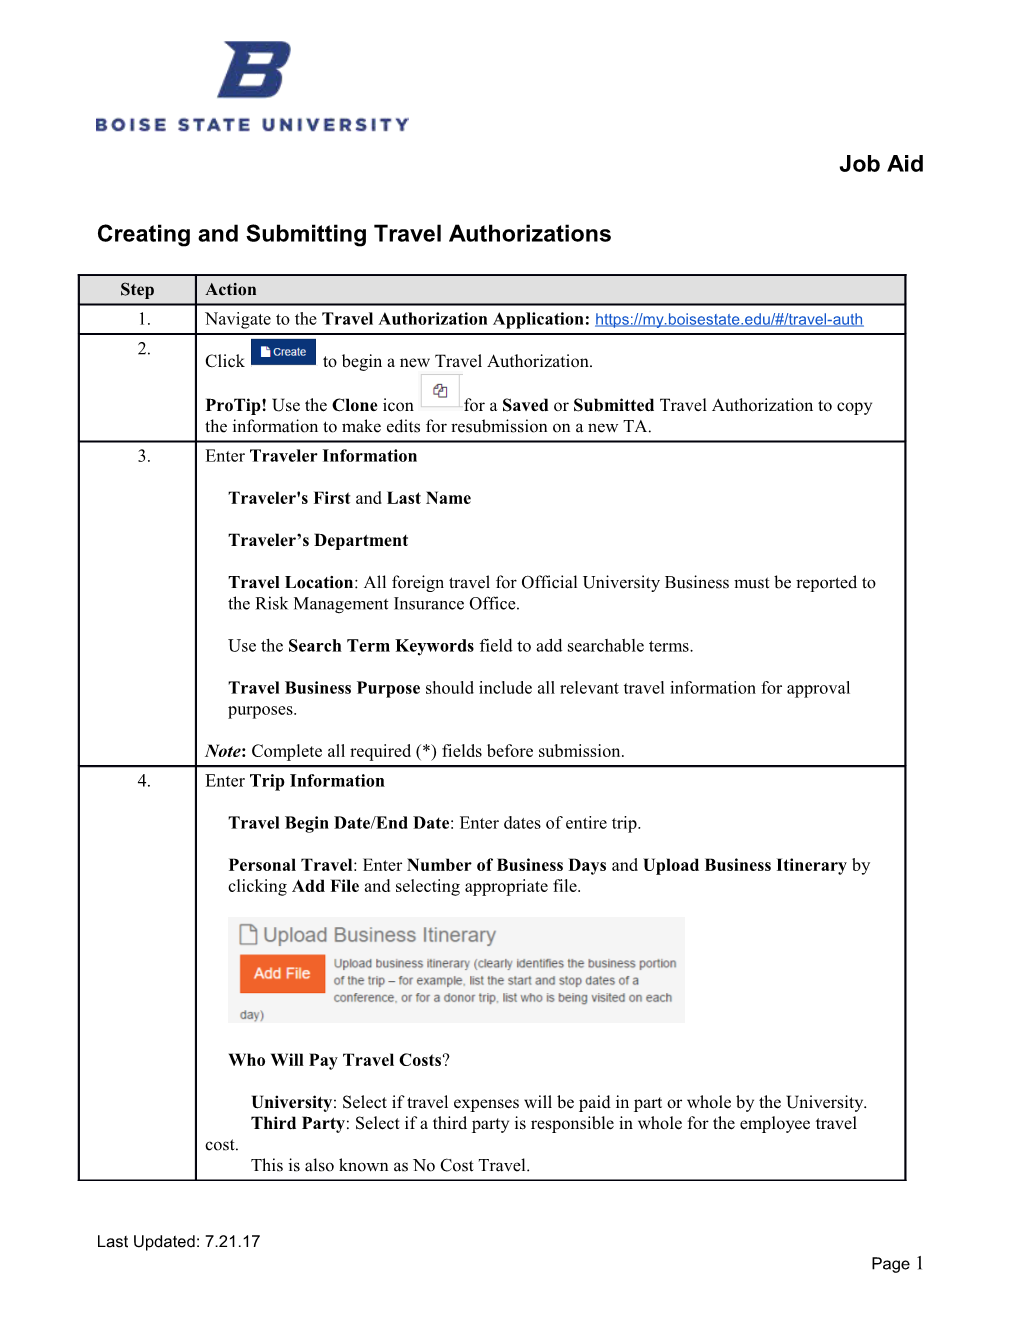 Creating and Submitting Travel Authorizations